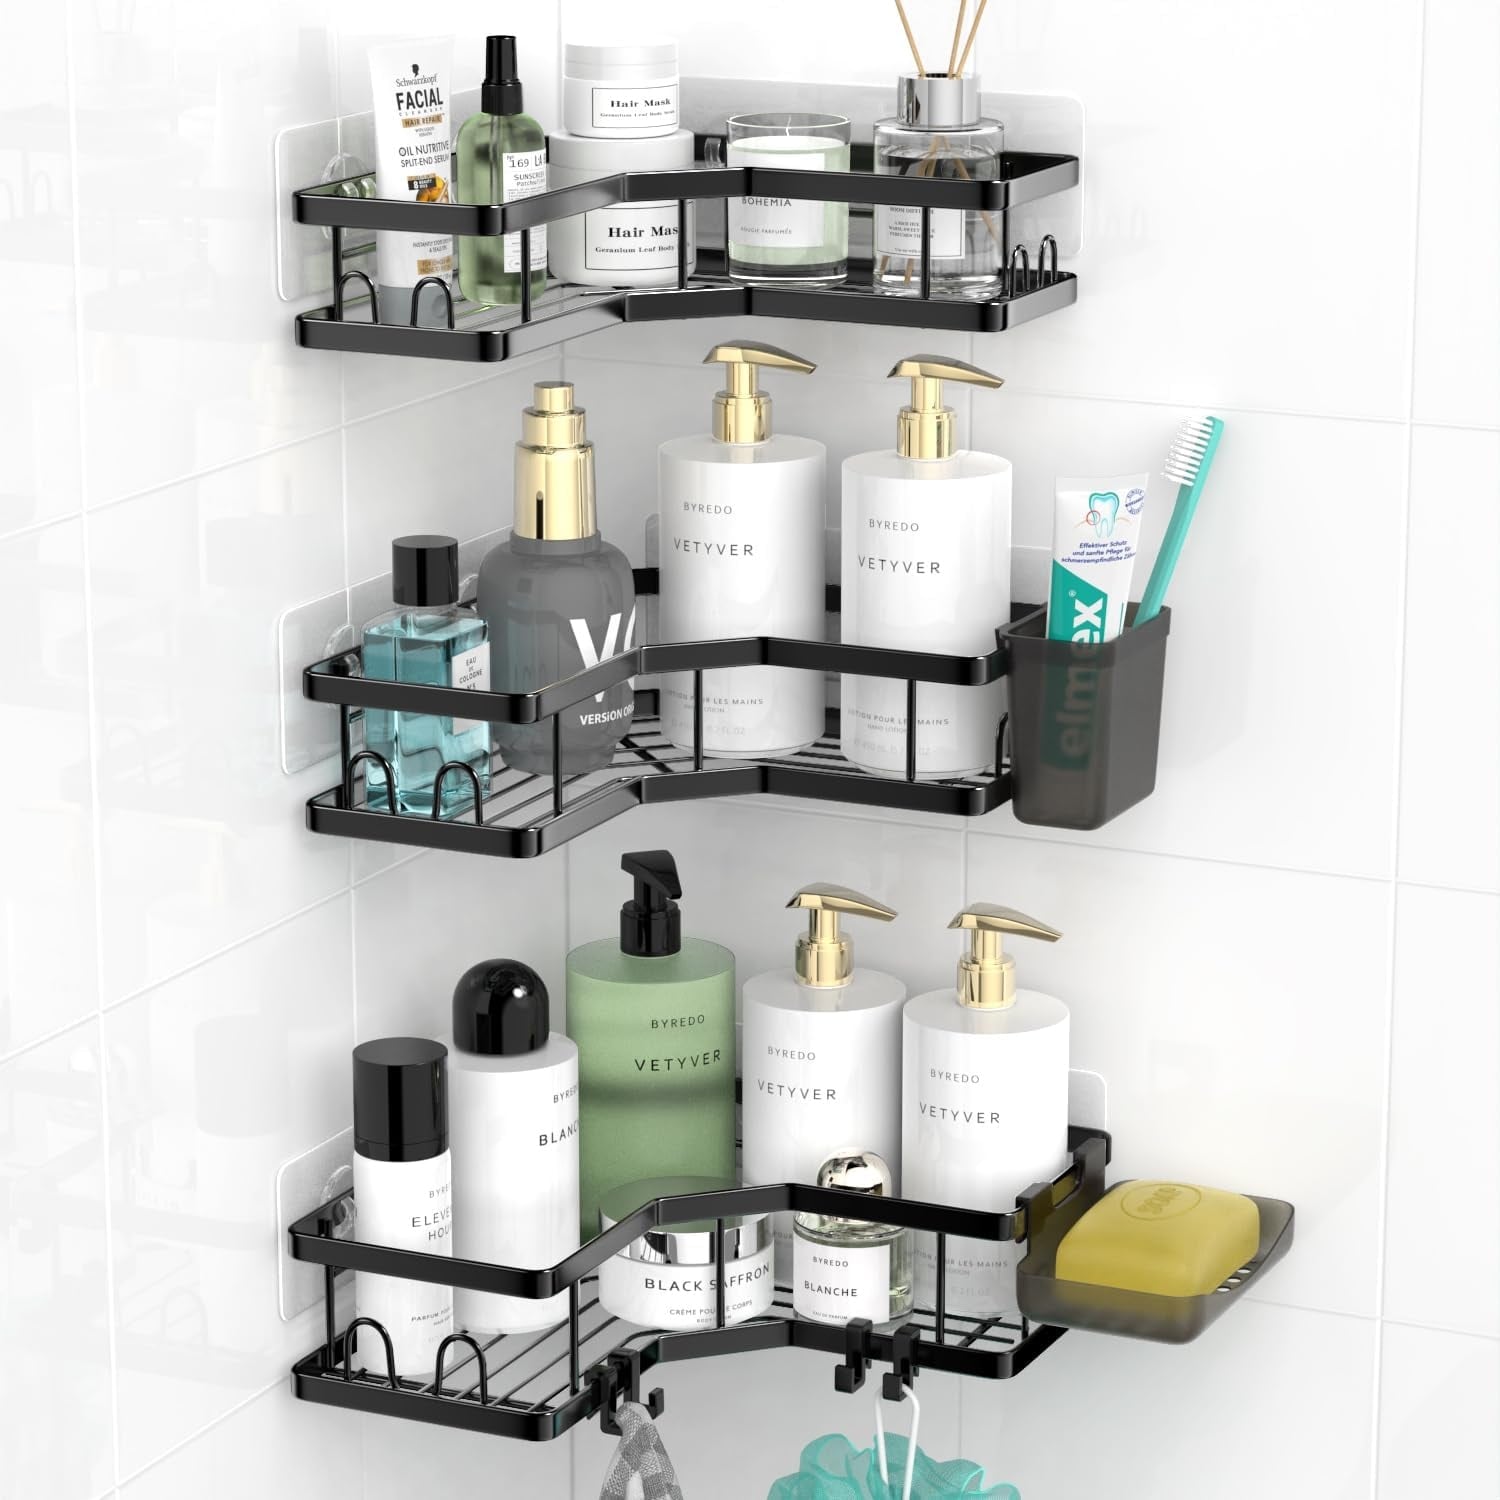 https://ak1.ostkcdn.com/images/products/is/images/direct/7041ae3464c3d5c2eb29983b17504e811fa4a827/3-Pack-Corner-Shower-Caddy-Adhesive-Bathtub-Shelves.jpg